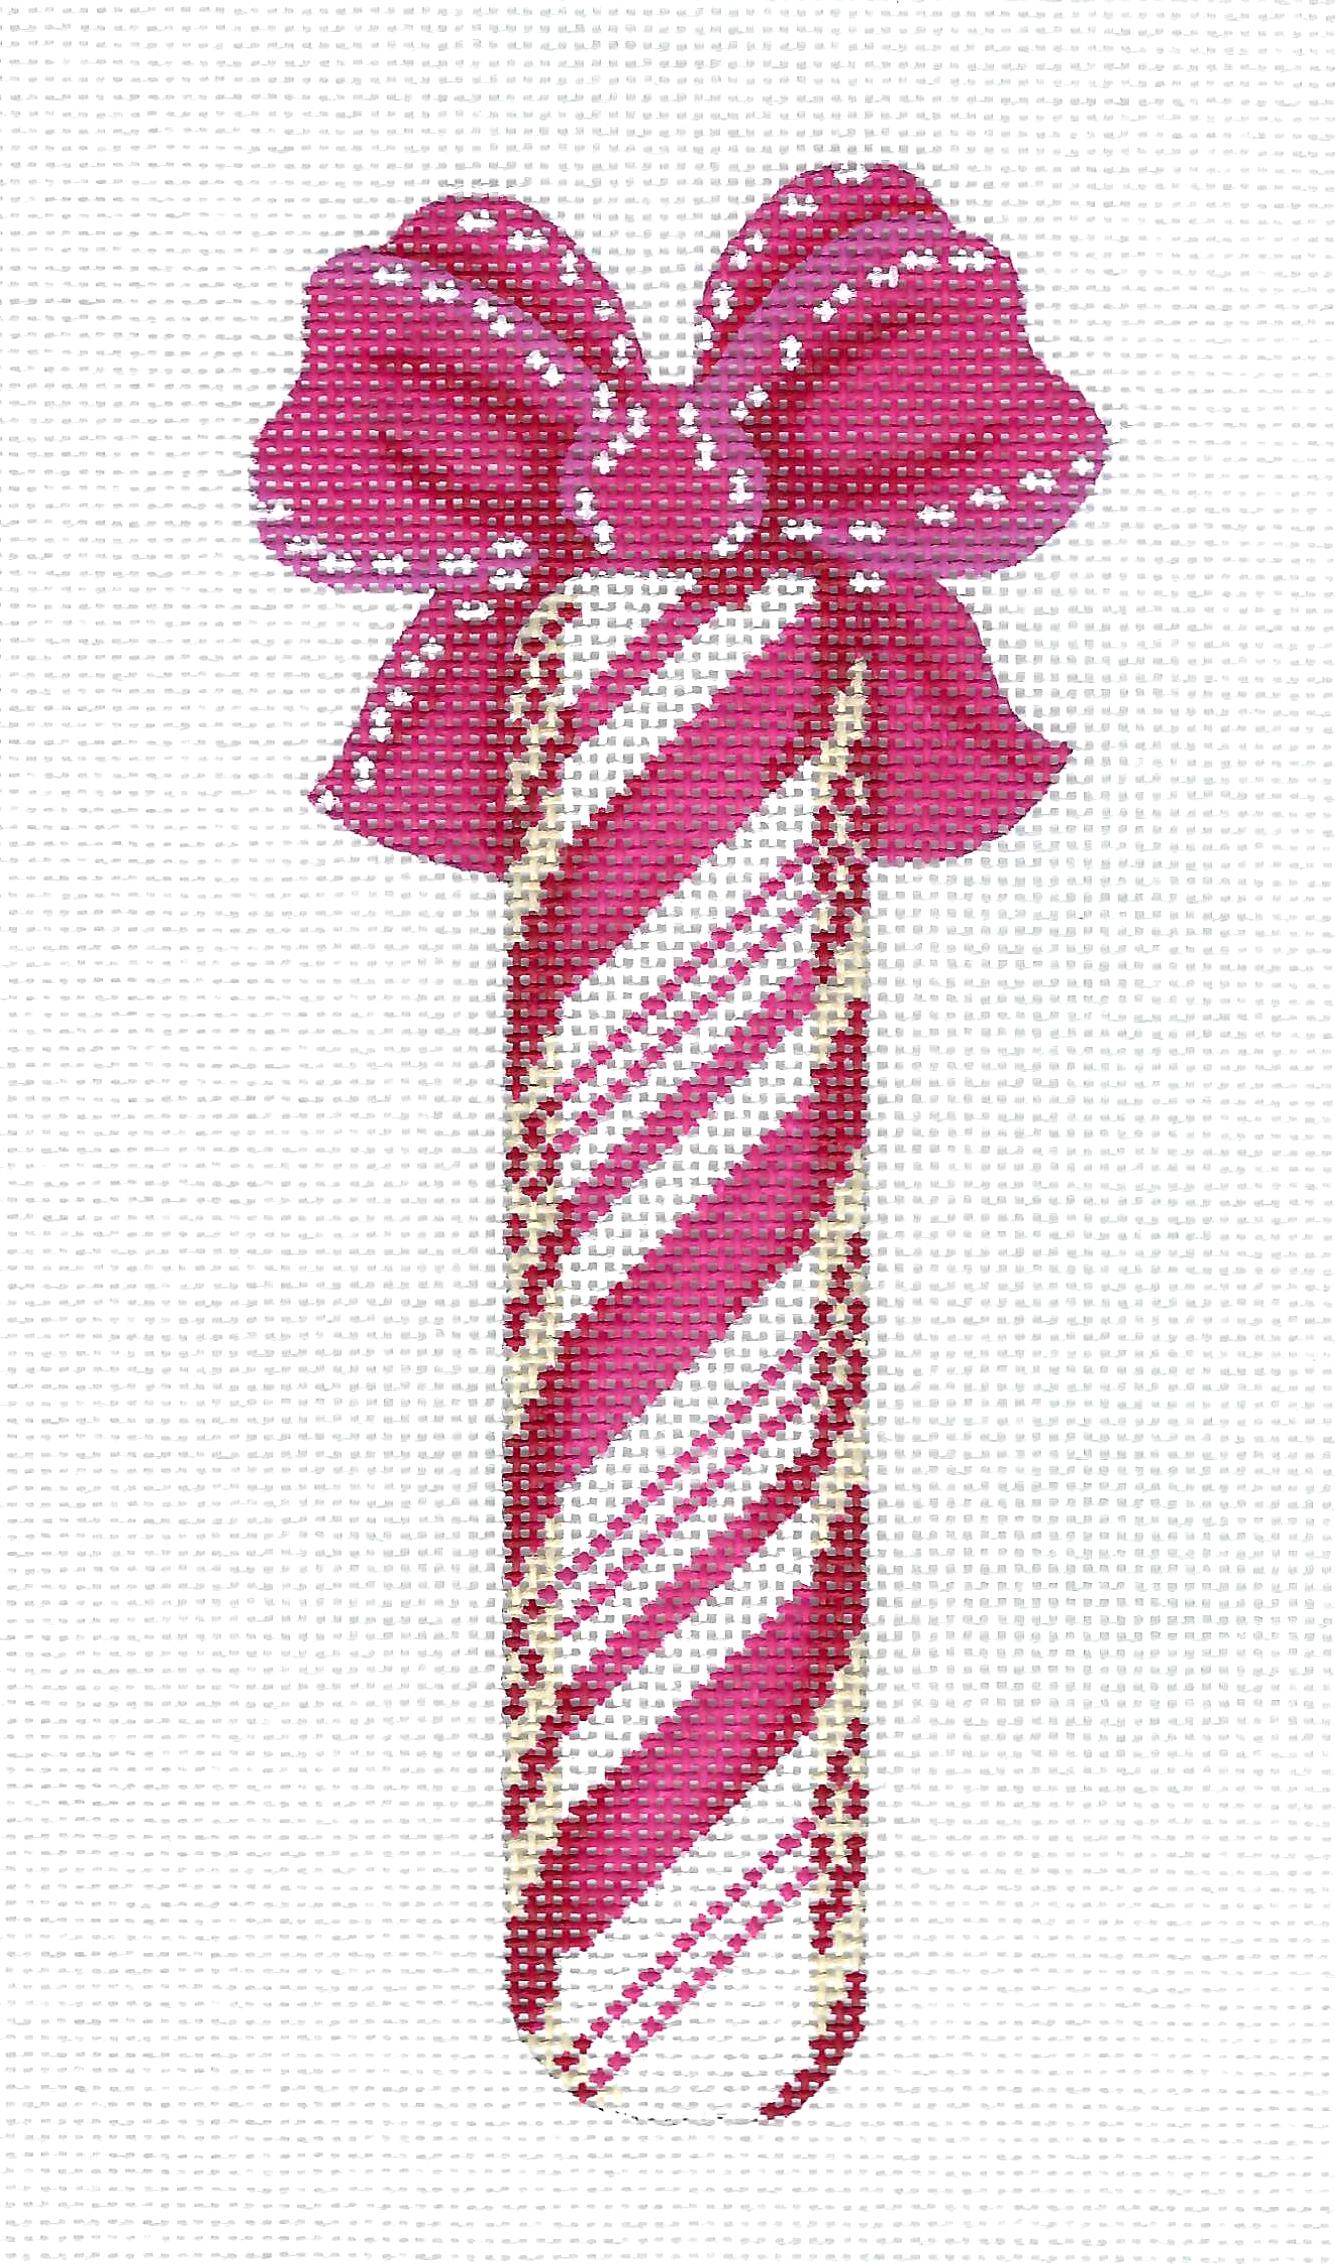 Candy Stick ~ Pear Berry Punch Candy Stick with Bow Handpainted 18 mesh Needlepoint by Kelly Clark